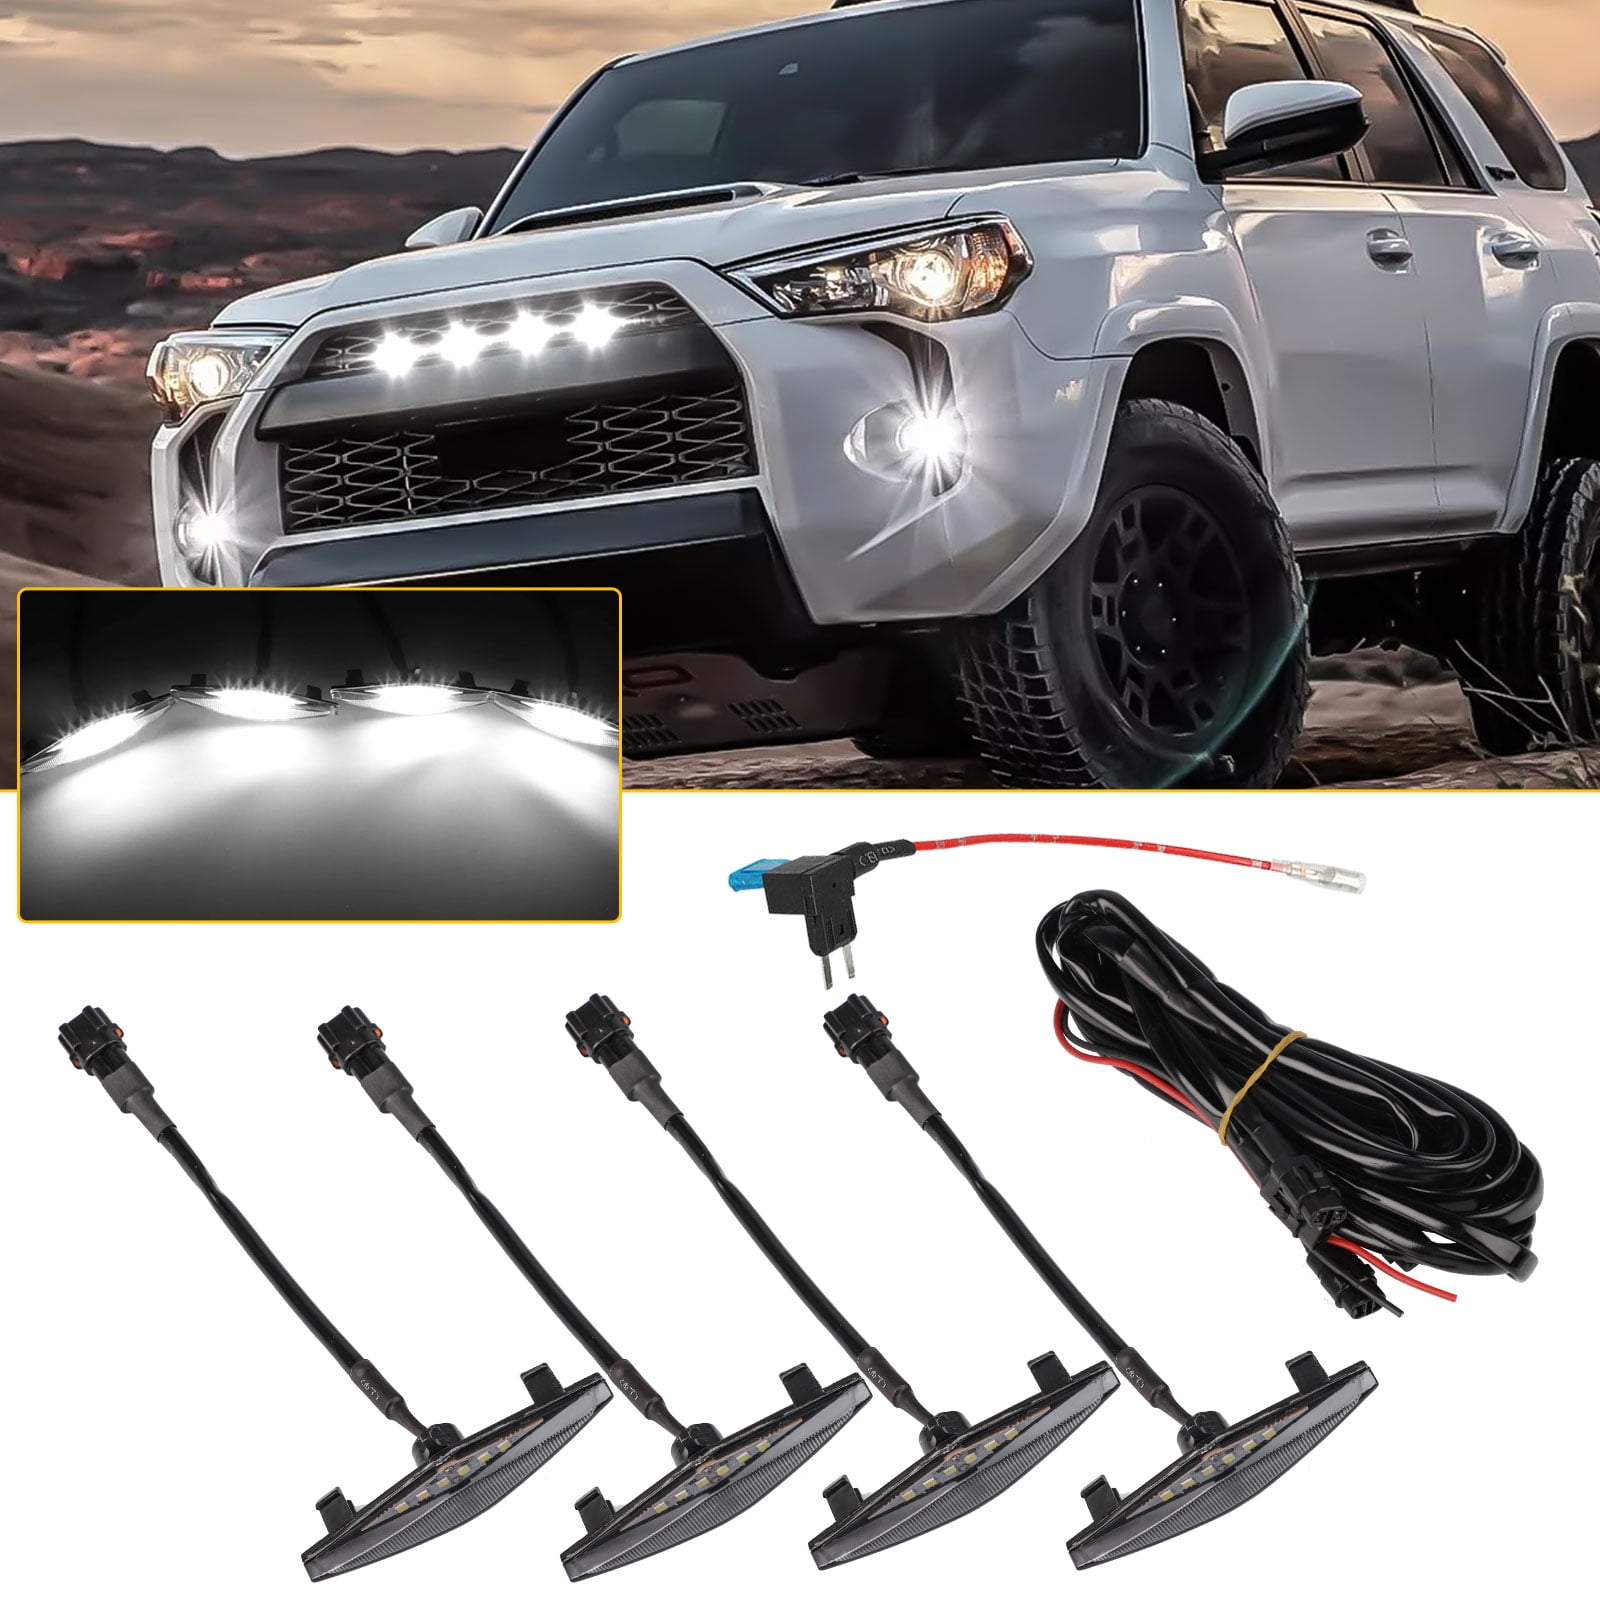 TRD off-road Including SR5 Limited 4 PCS Led Smoked Grille Lights Kits for 4Runner TRD Pro 2014-2019 TRO Pro （Smoked shell white lights）